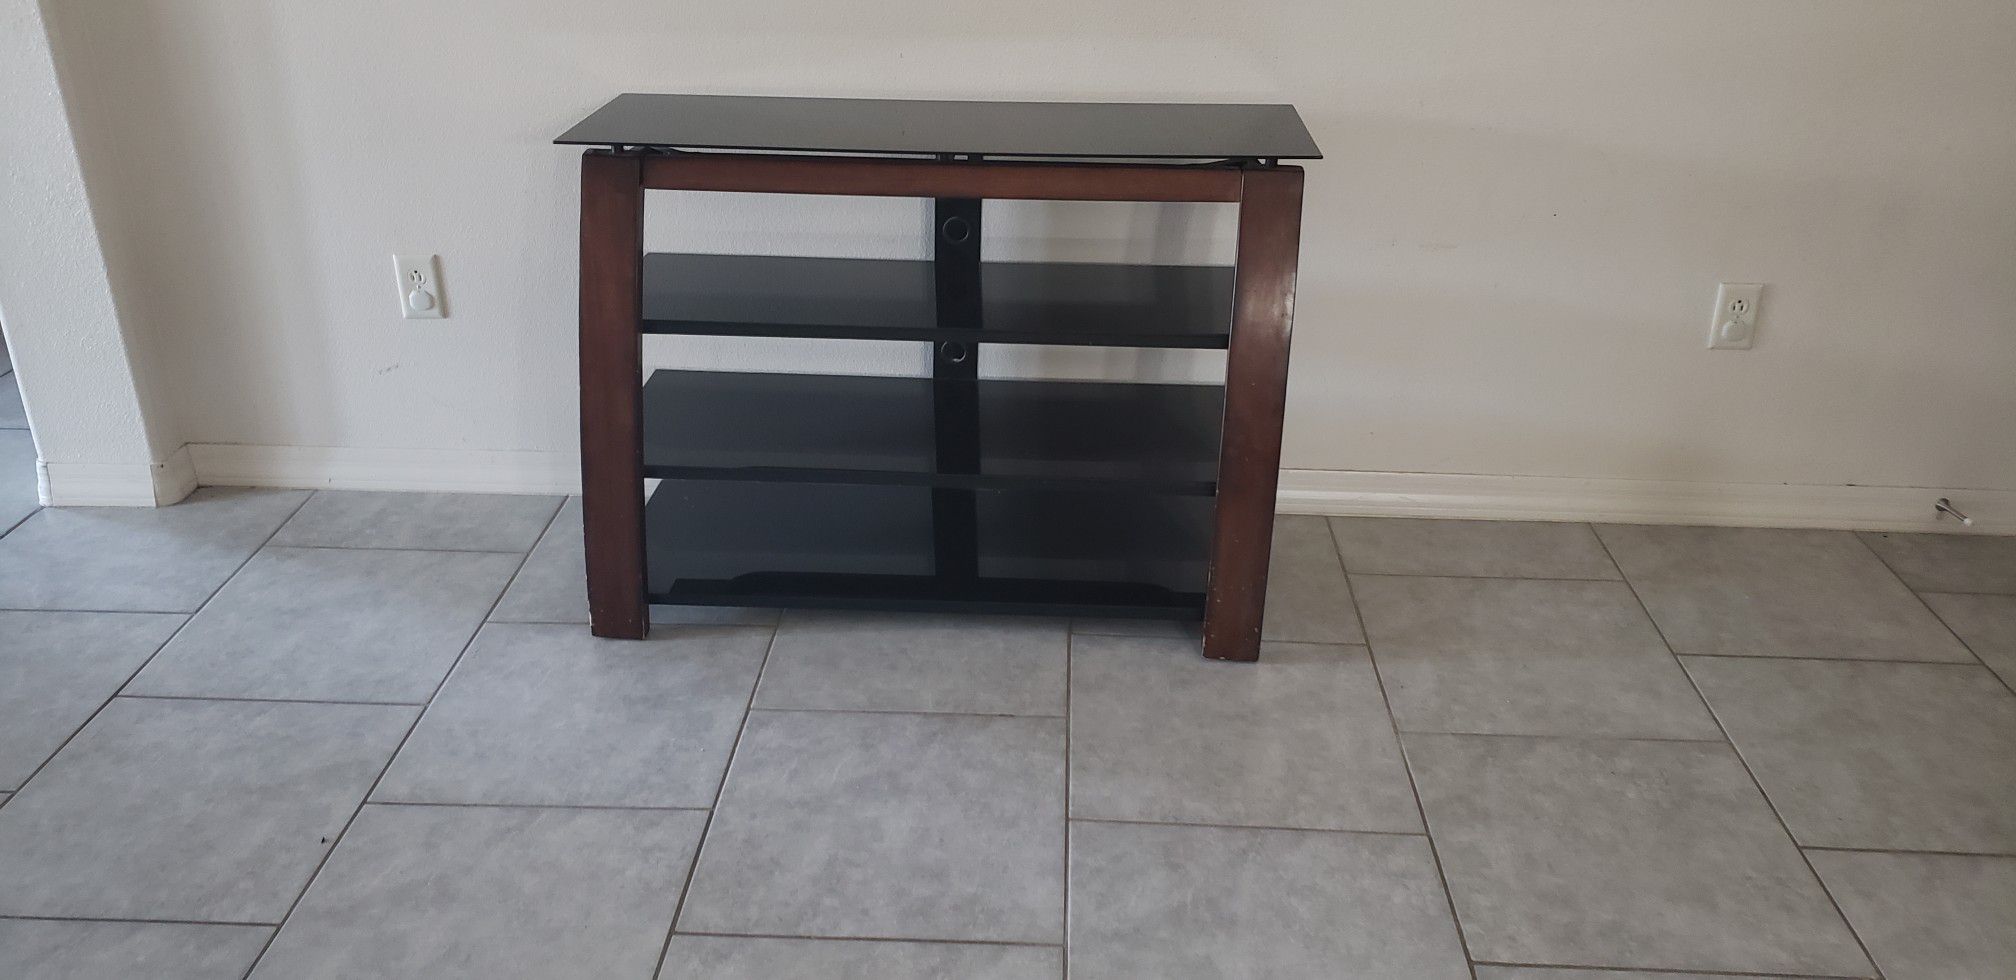 TV stand for 50"